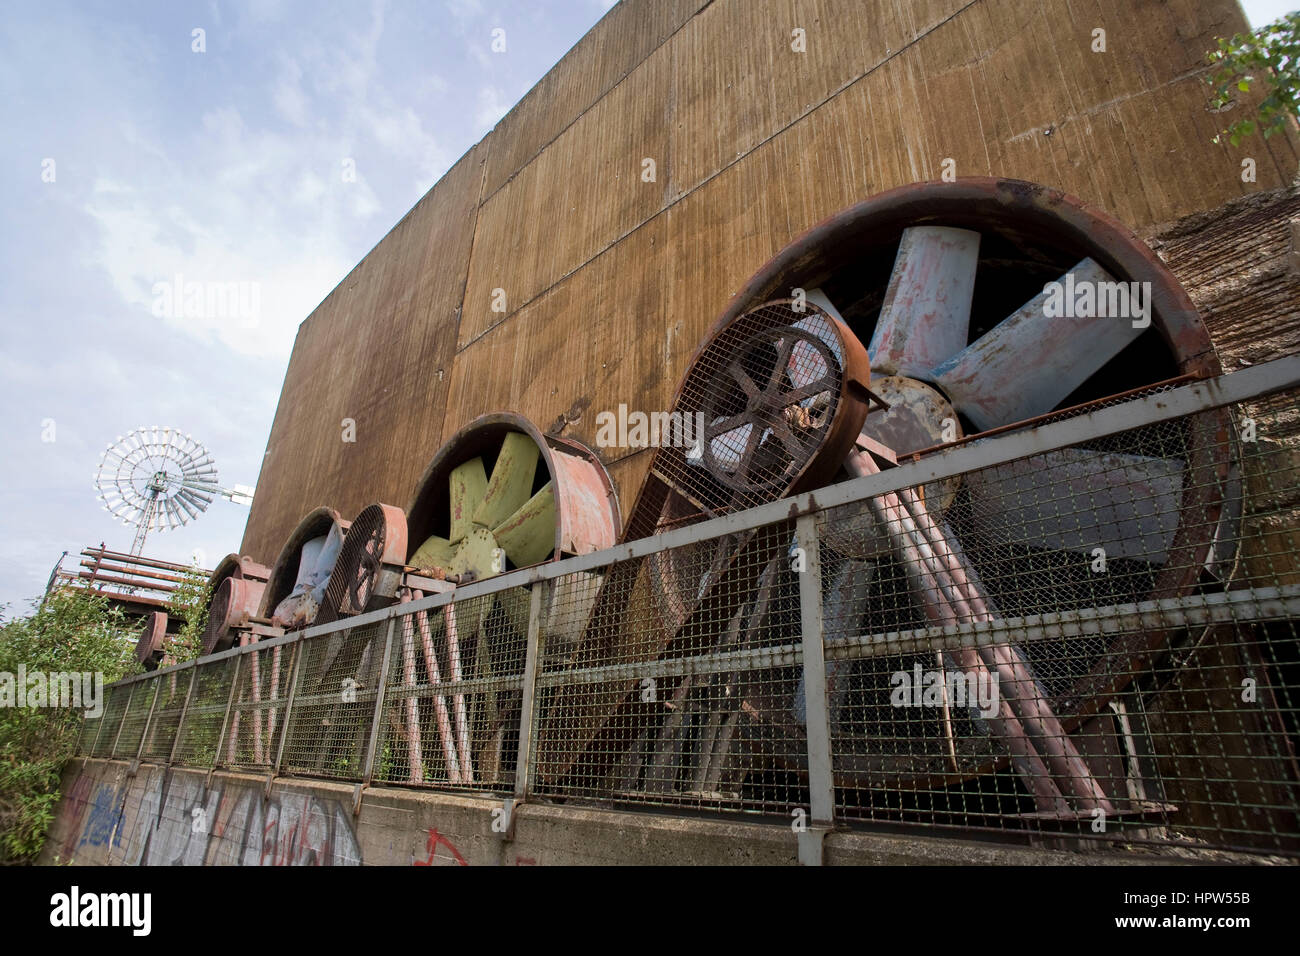 Germany, Duisburg, Duisburg-Nord Country Park, former Thyssen blast furnace works, ventilators for cooling the sewage water. Stock Photo